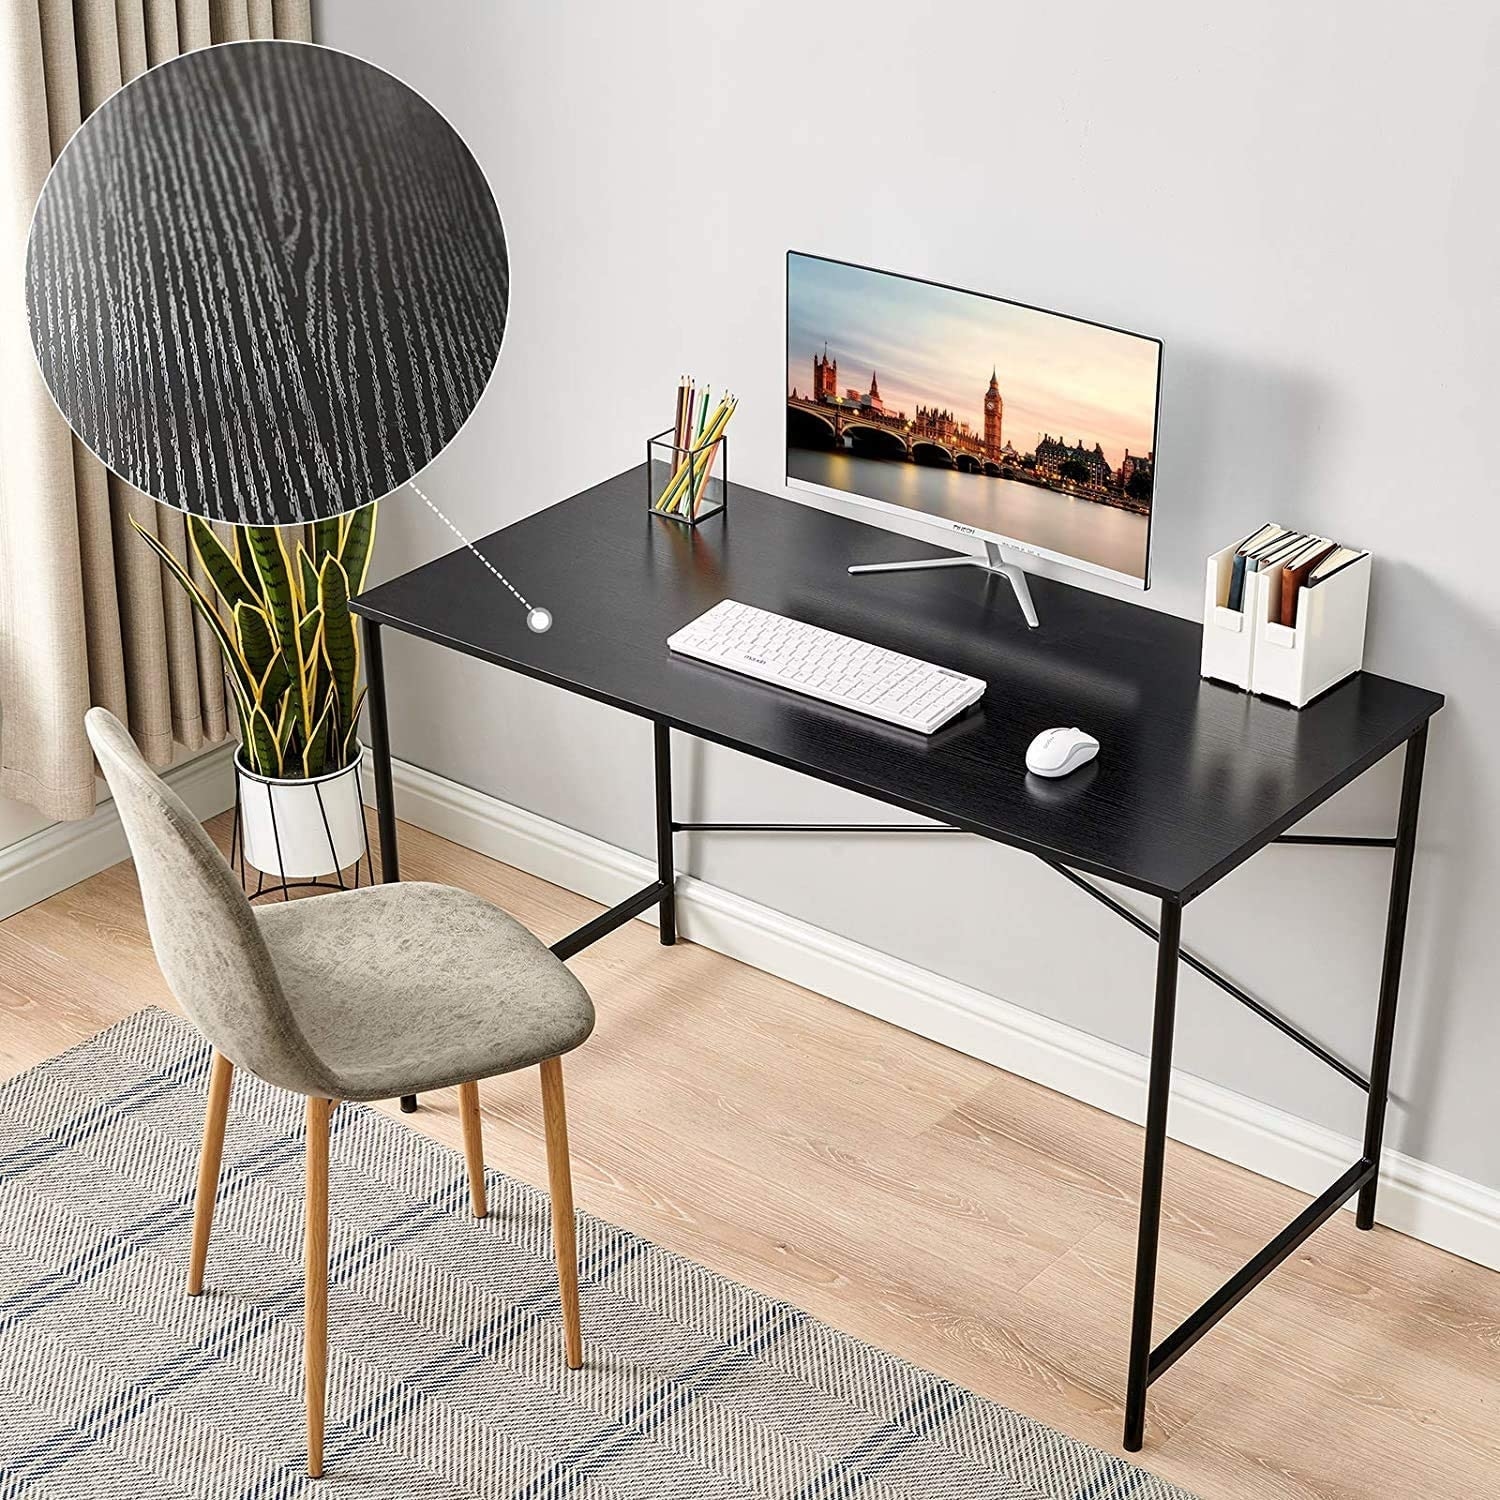 https://ak1.ostkcdn.com/images/products/is/images/direct/fb383db29fb24f294af97685e8eb3fbed04b84e7/Home-Office-Desk-Computer-Desk-with-Metal-Frame-and-Manufactured-Wood-Top-Modern-Home-Office-Writing-Desk.jpg